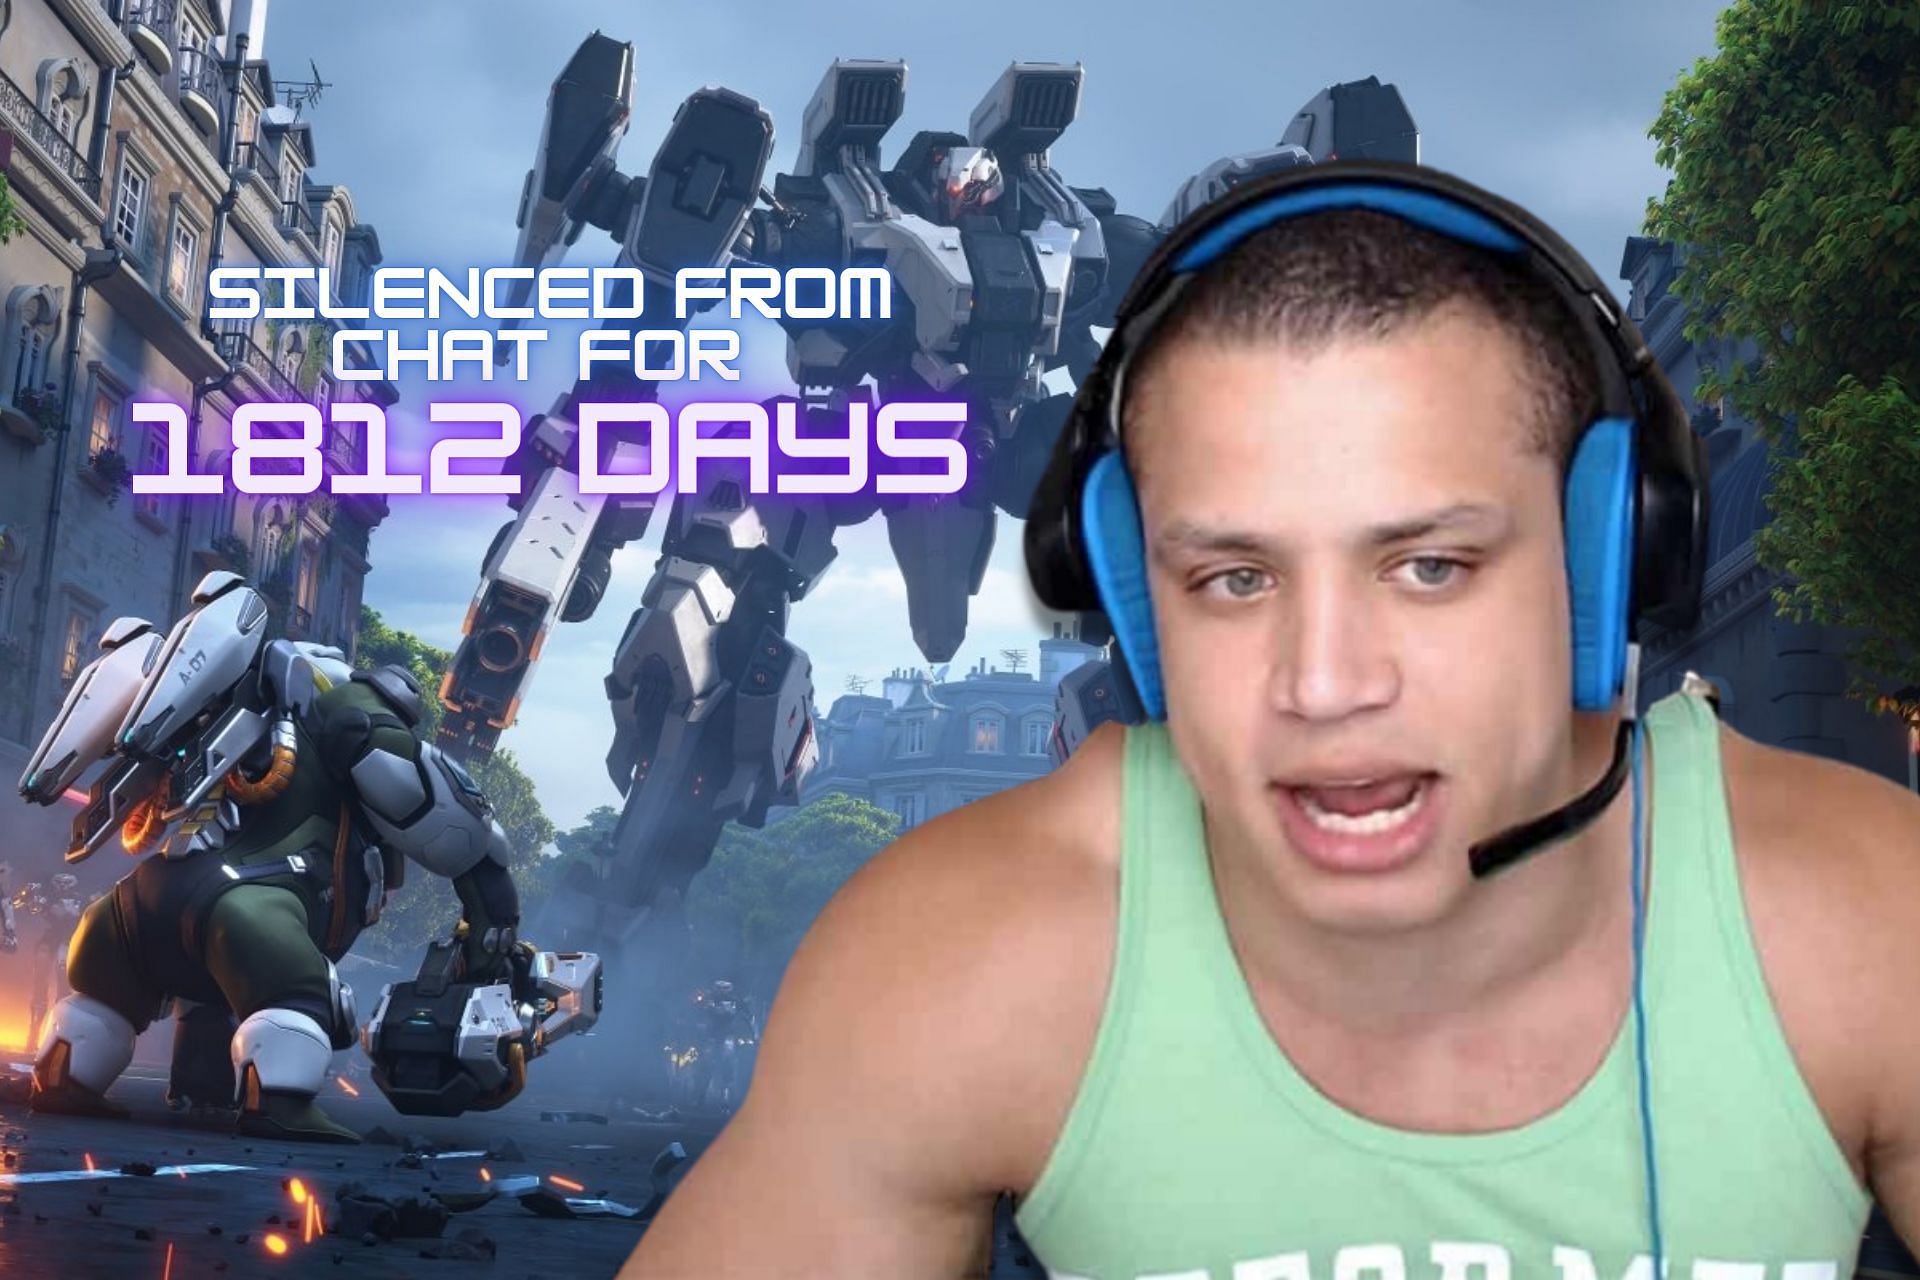 I don't care - Tyler1 rage quits Overwatch 2, says he won't play